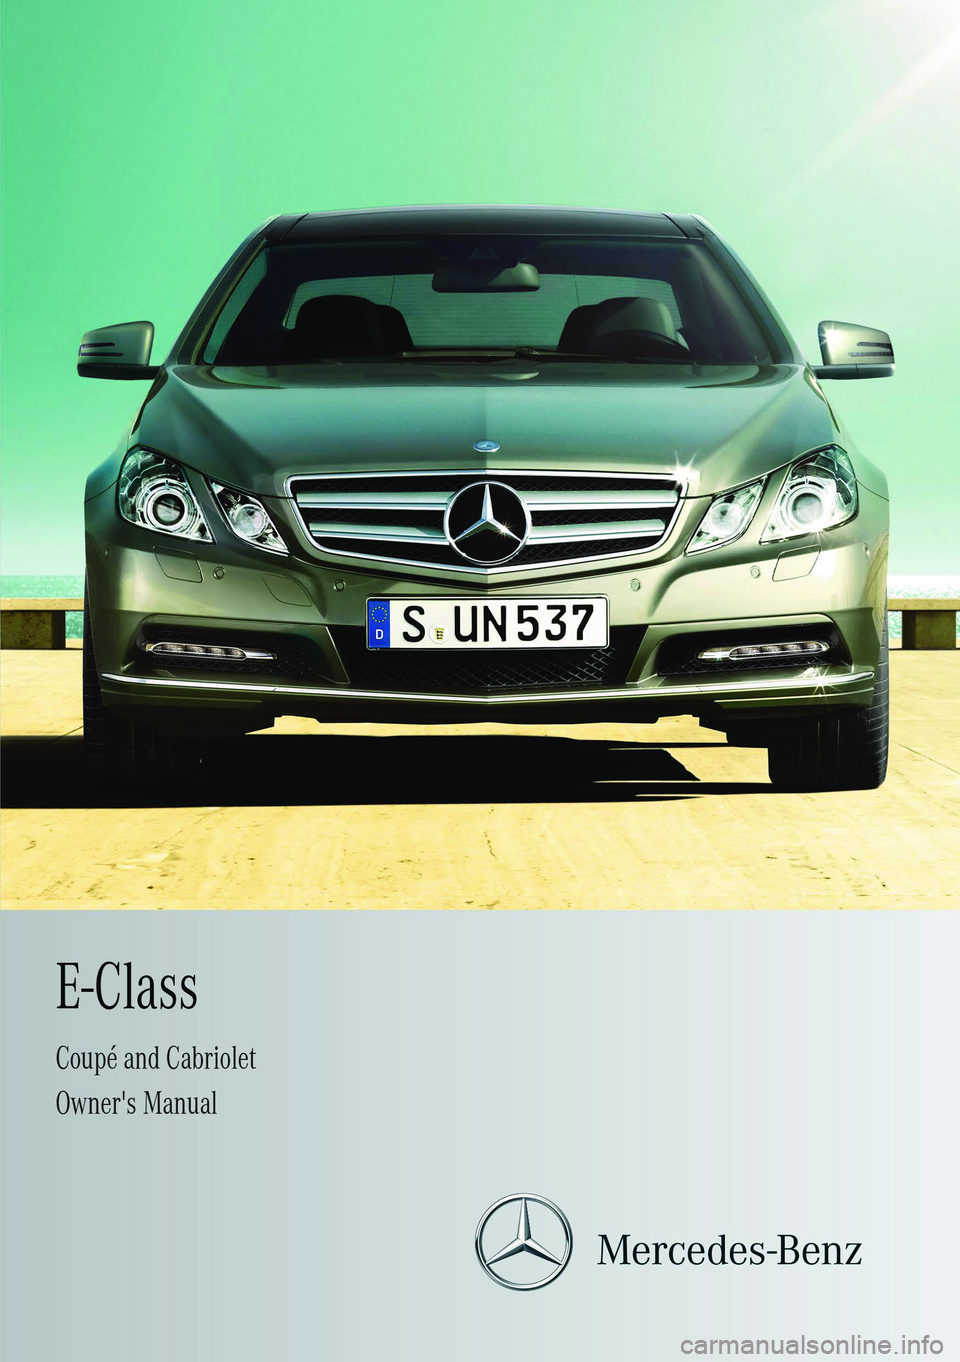 MERCEDES-BENZ E-CLASS CABRIOLET 2012  Owners Manual 